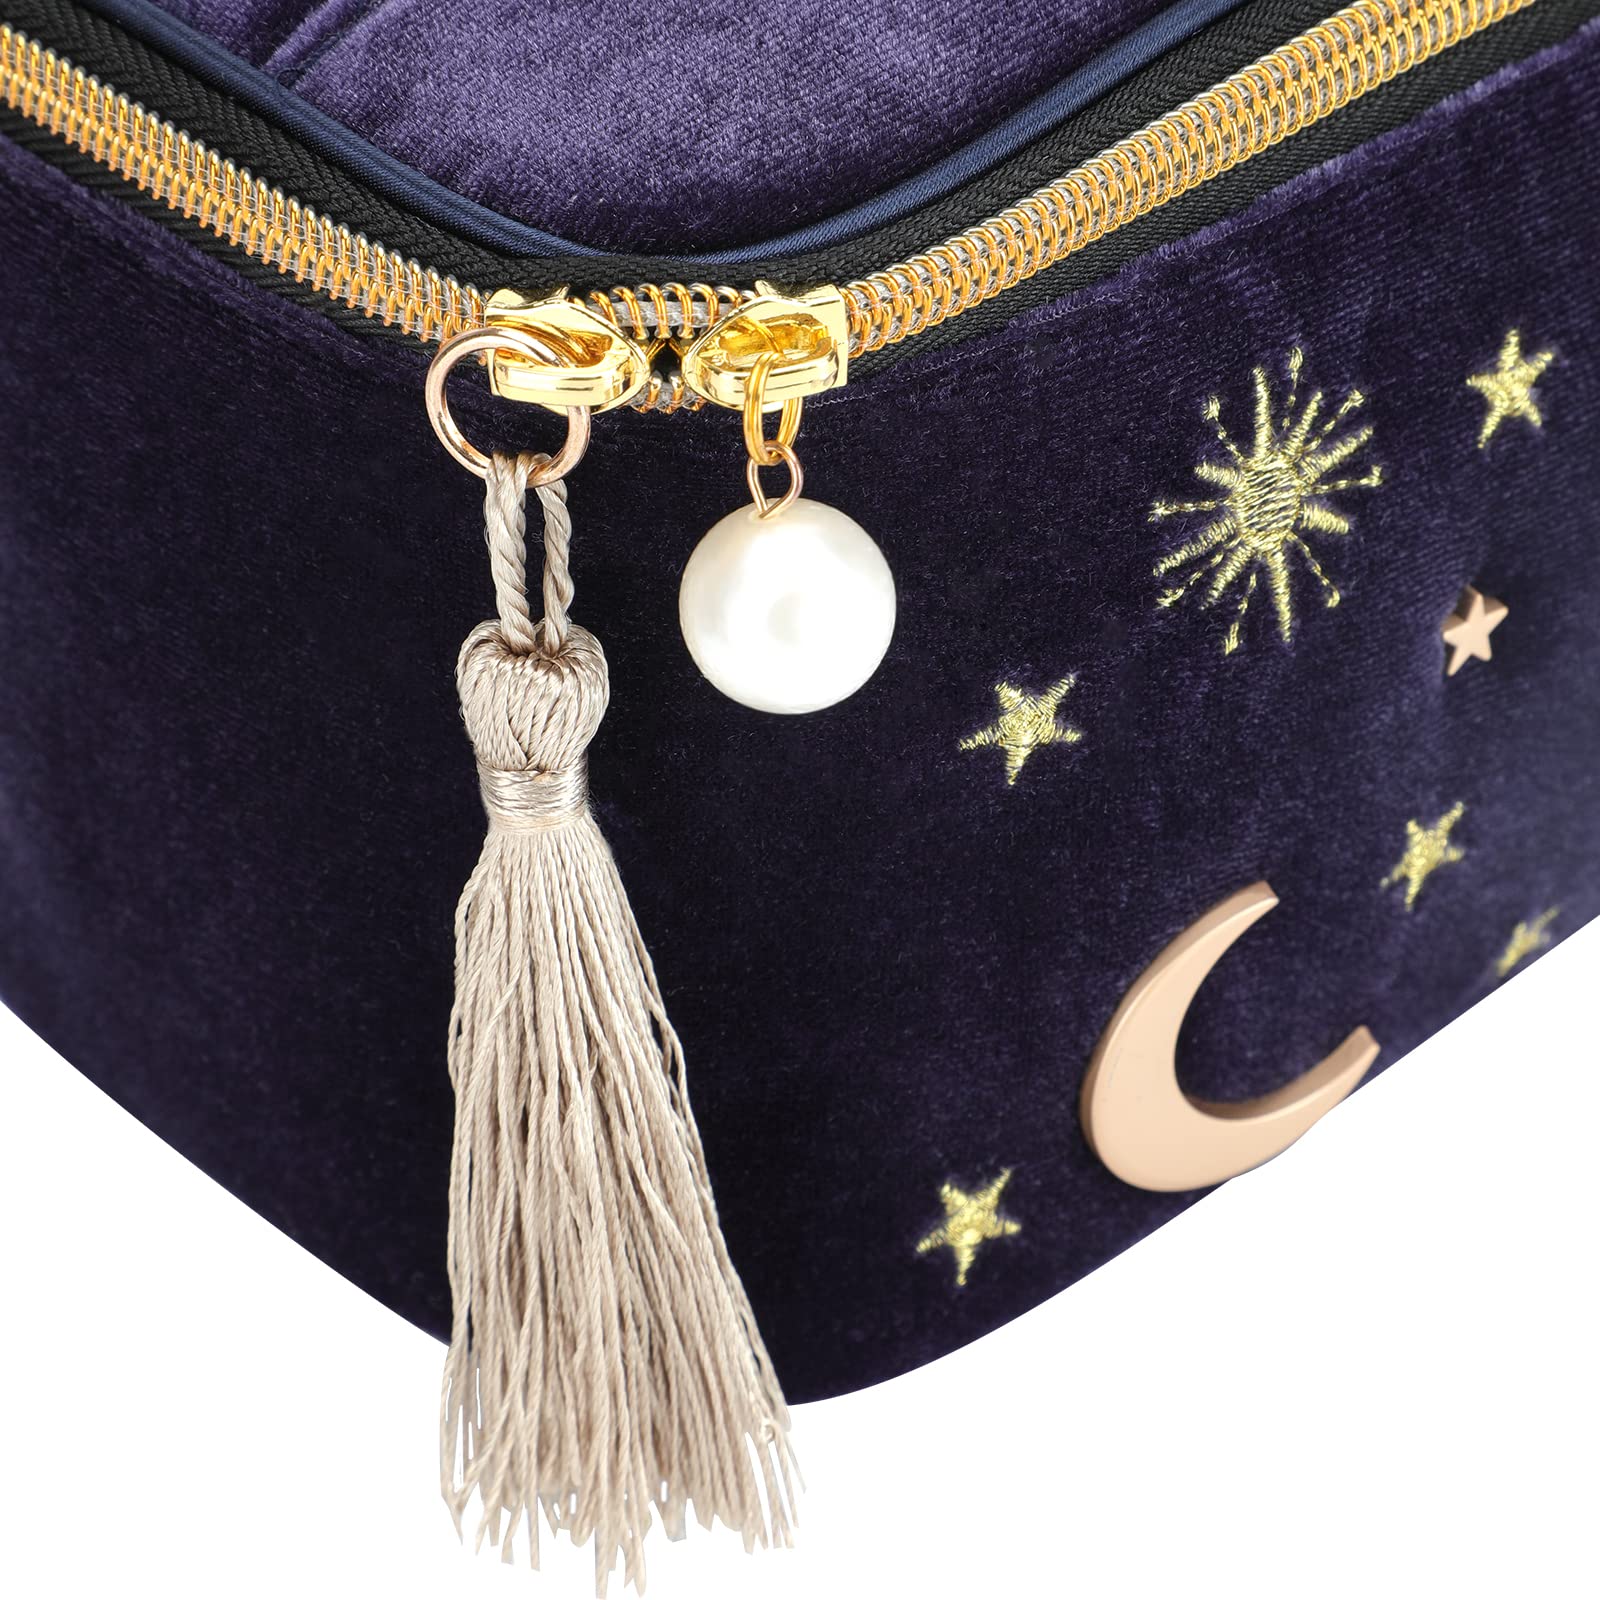 Handy cosmetic makeup bag,square Navy Velvet Embroidered Applique Moon Stars Sun Cosmetic Bag,High capacity Starry Makeup Pouch with Tassels & Pearl Zipper,Beautician Storage Bag Clutch Handbags